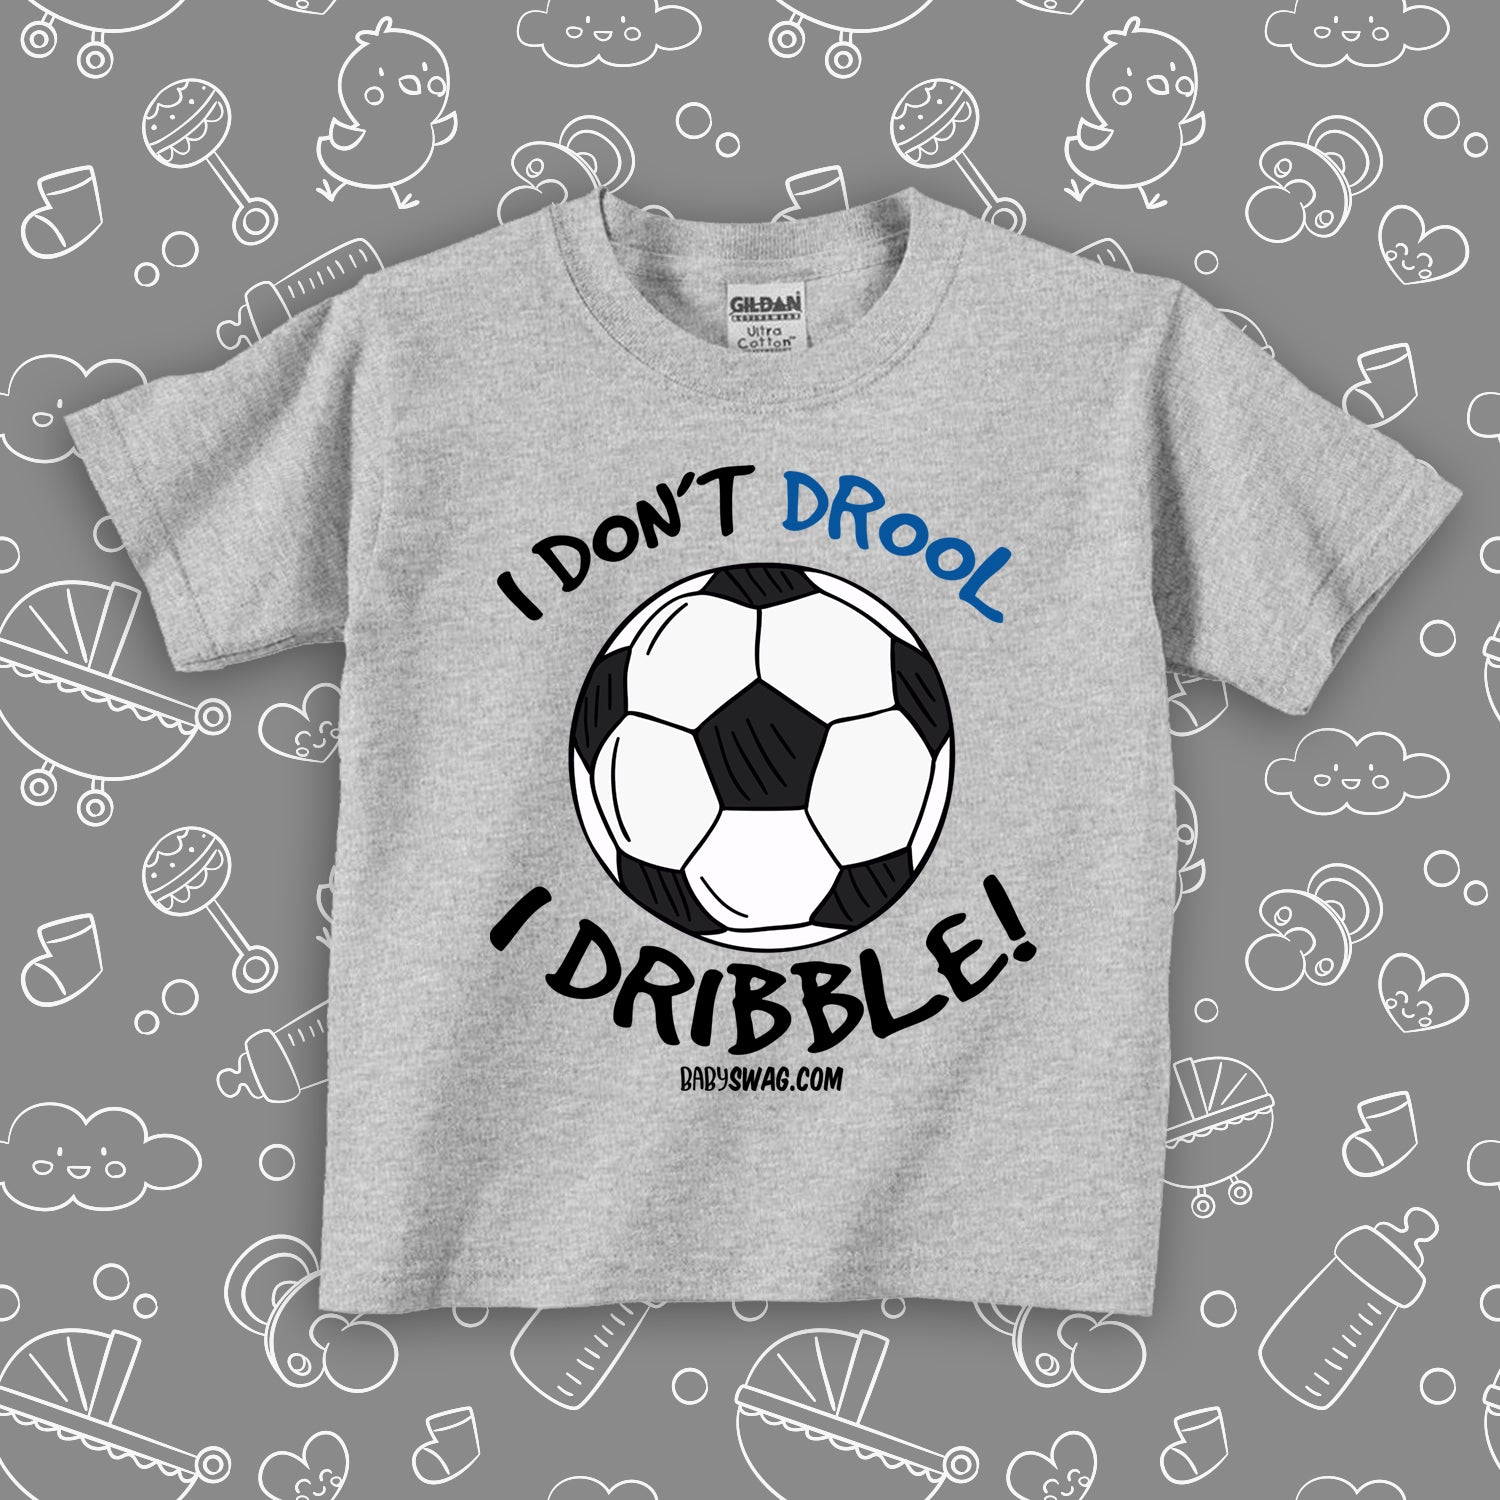 Funny toddler boy shirts with saying "I Don't Drool, I Dribble!" in grey. 